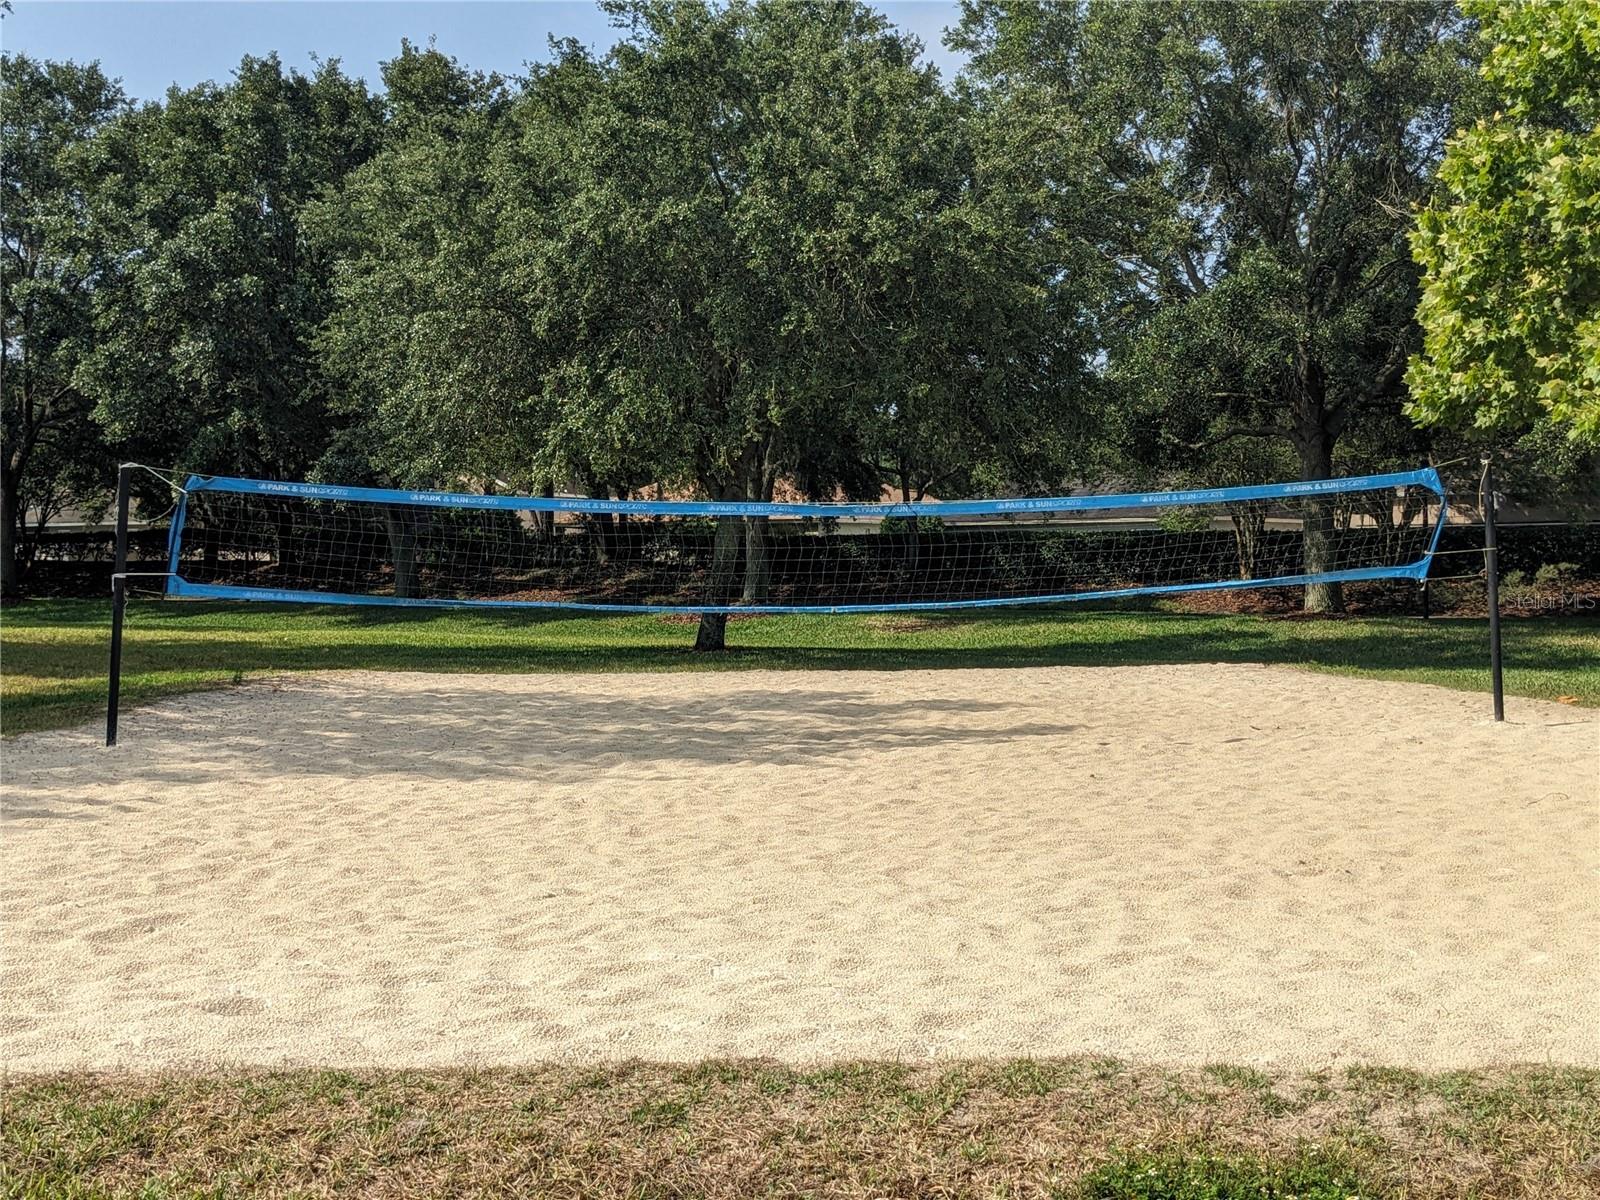 Volleyball Pit